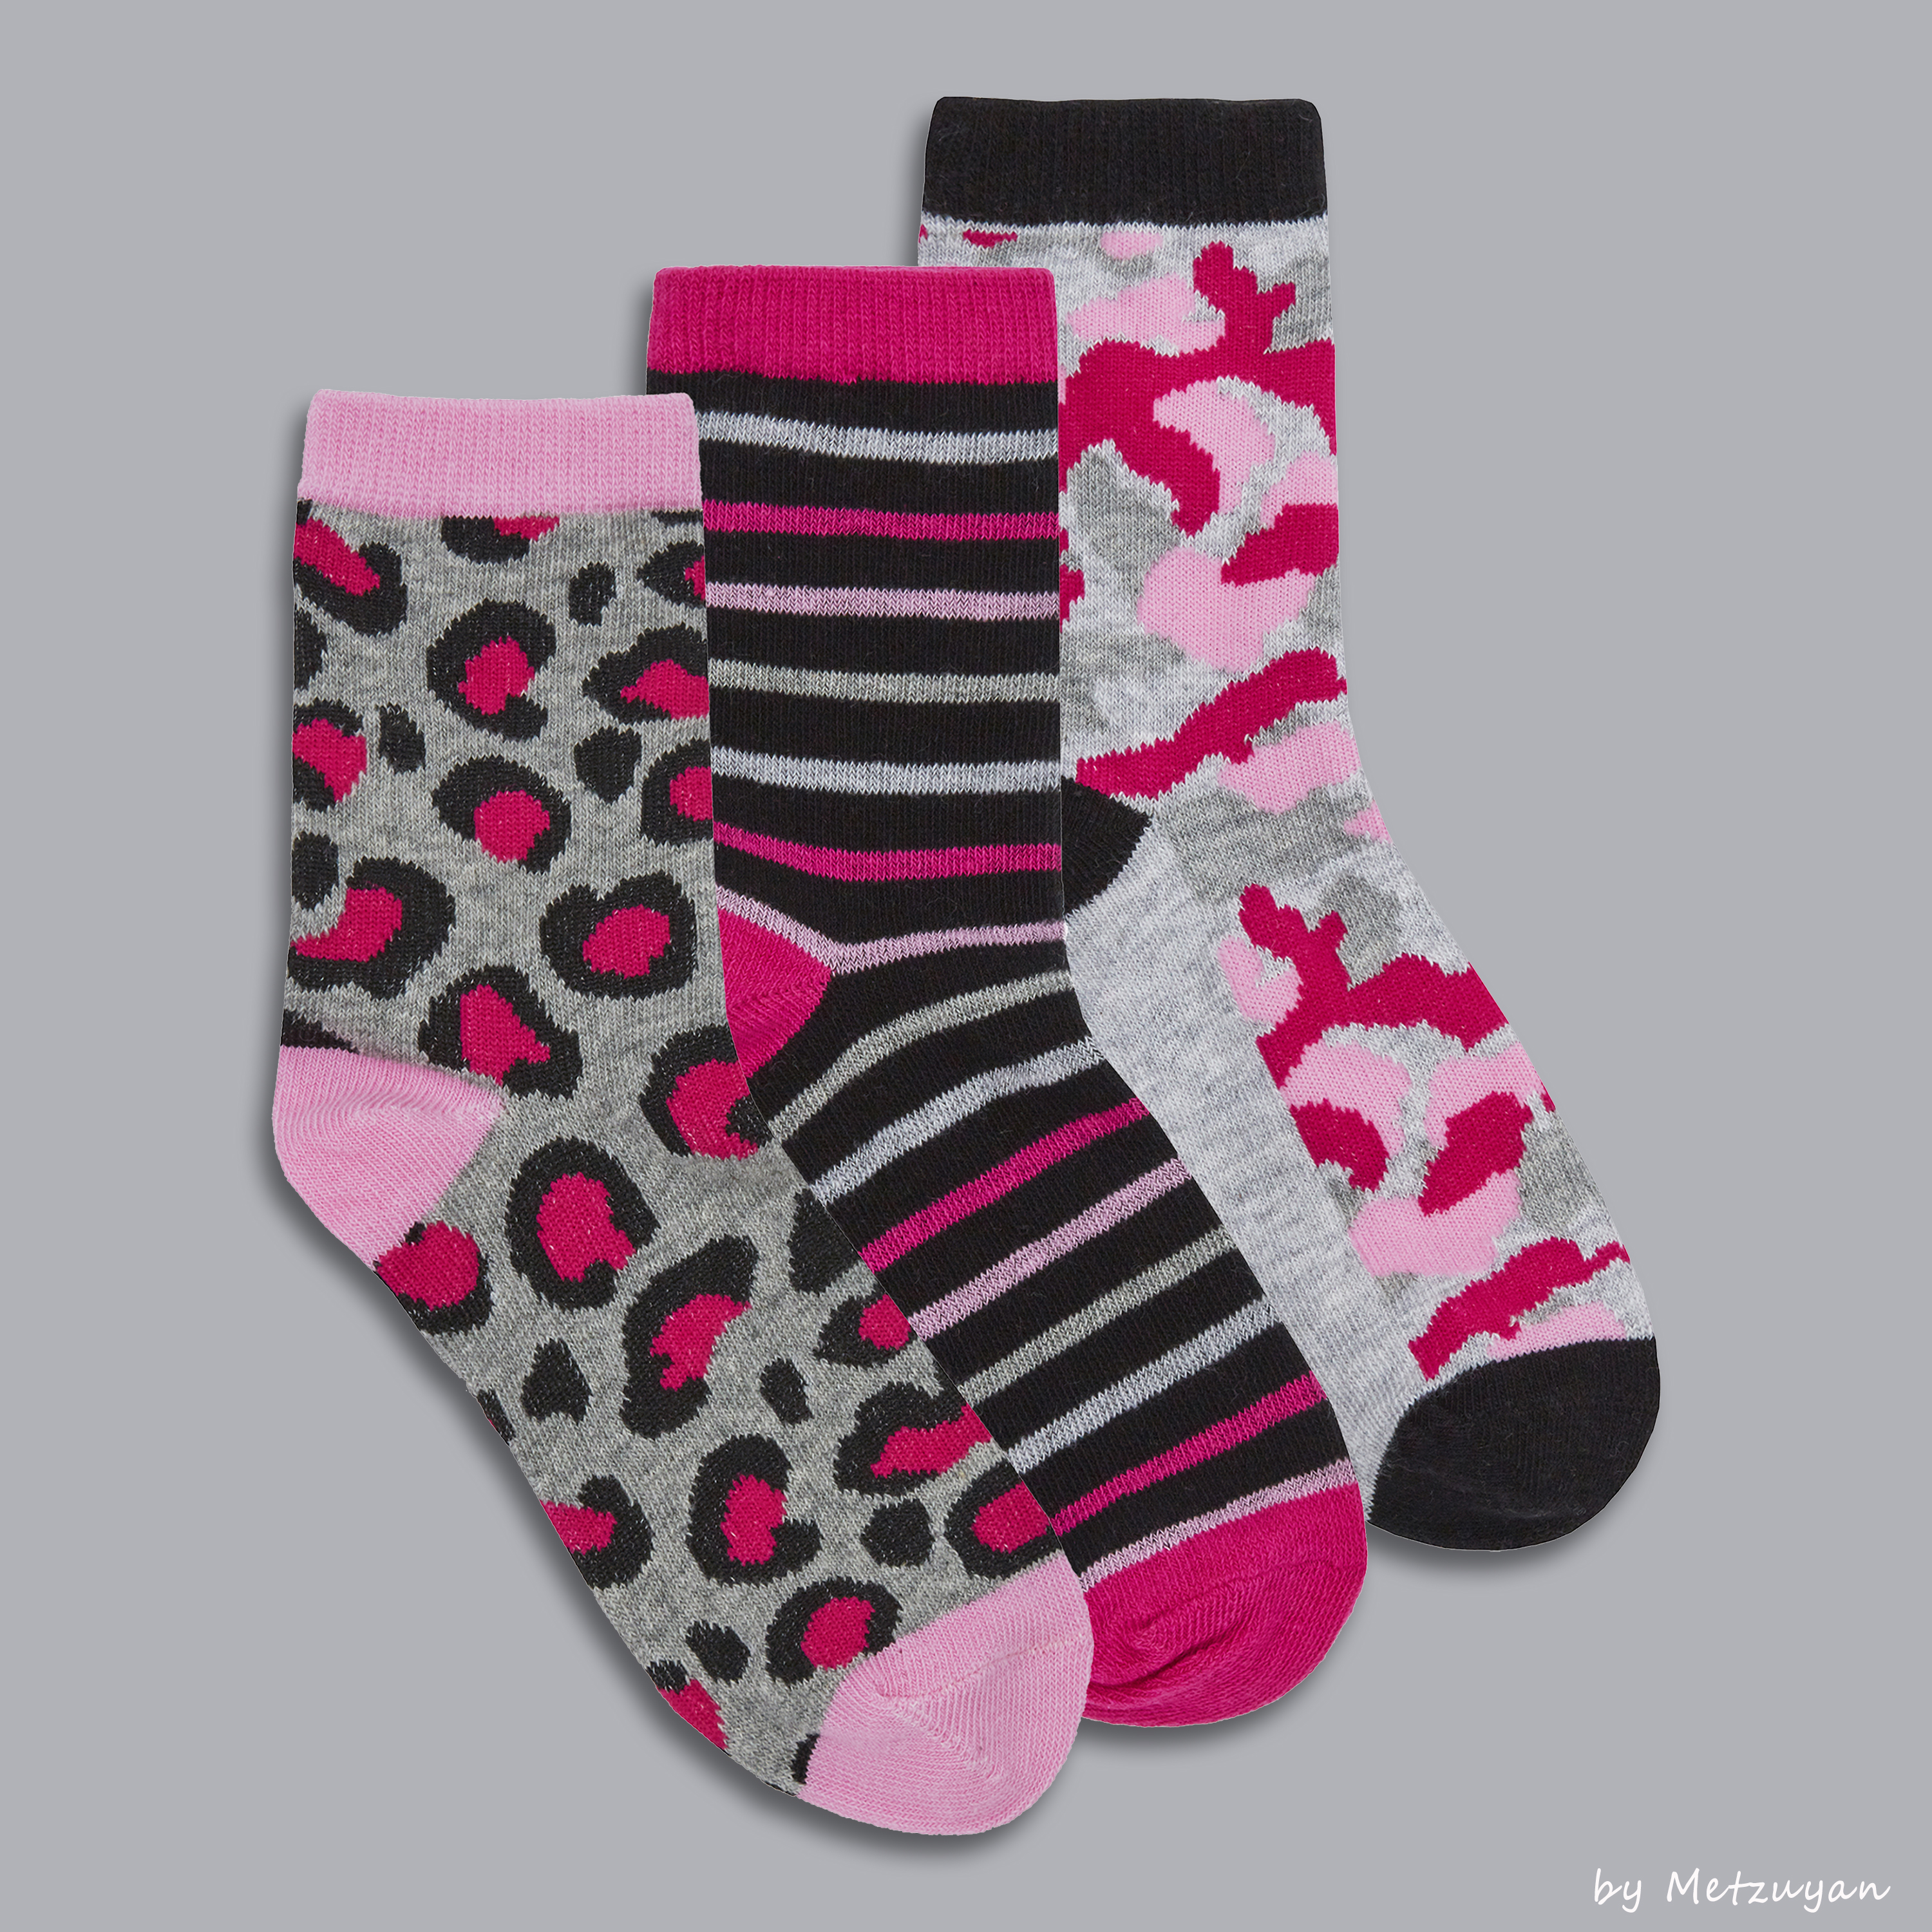 2-5 Pack of 4 pairs girls/teenagers 92% cotton socks 3 sizes 6-9,10-1 